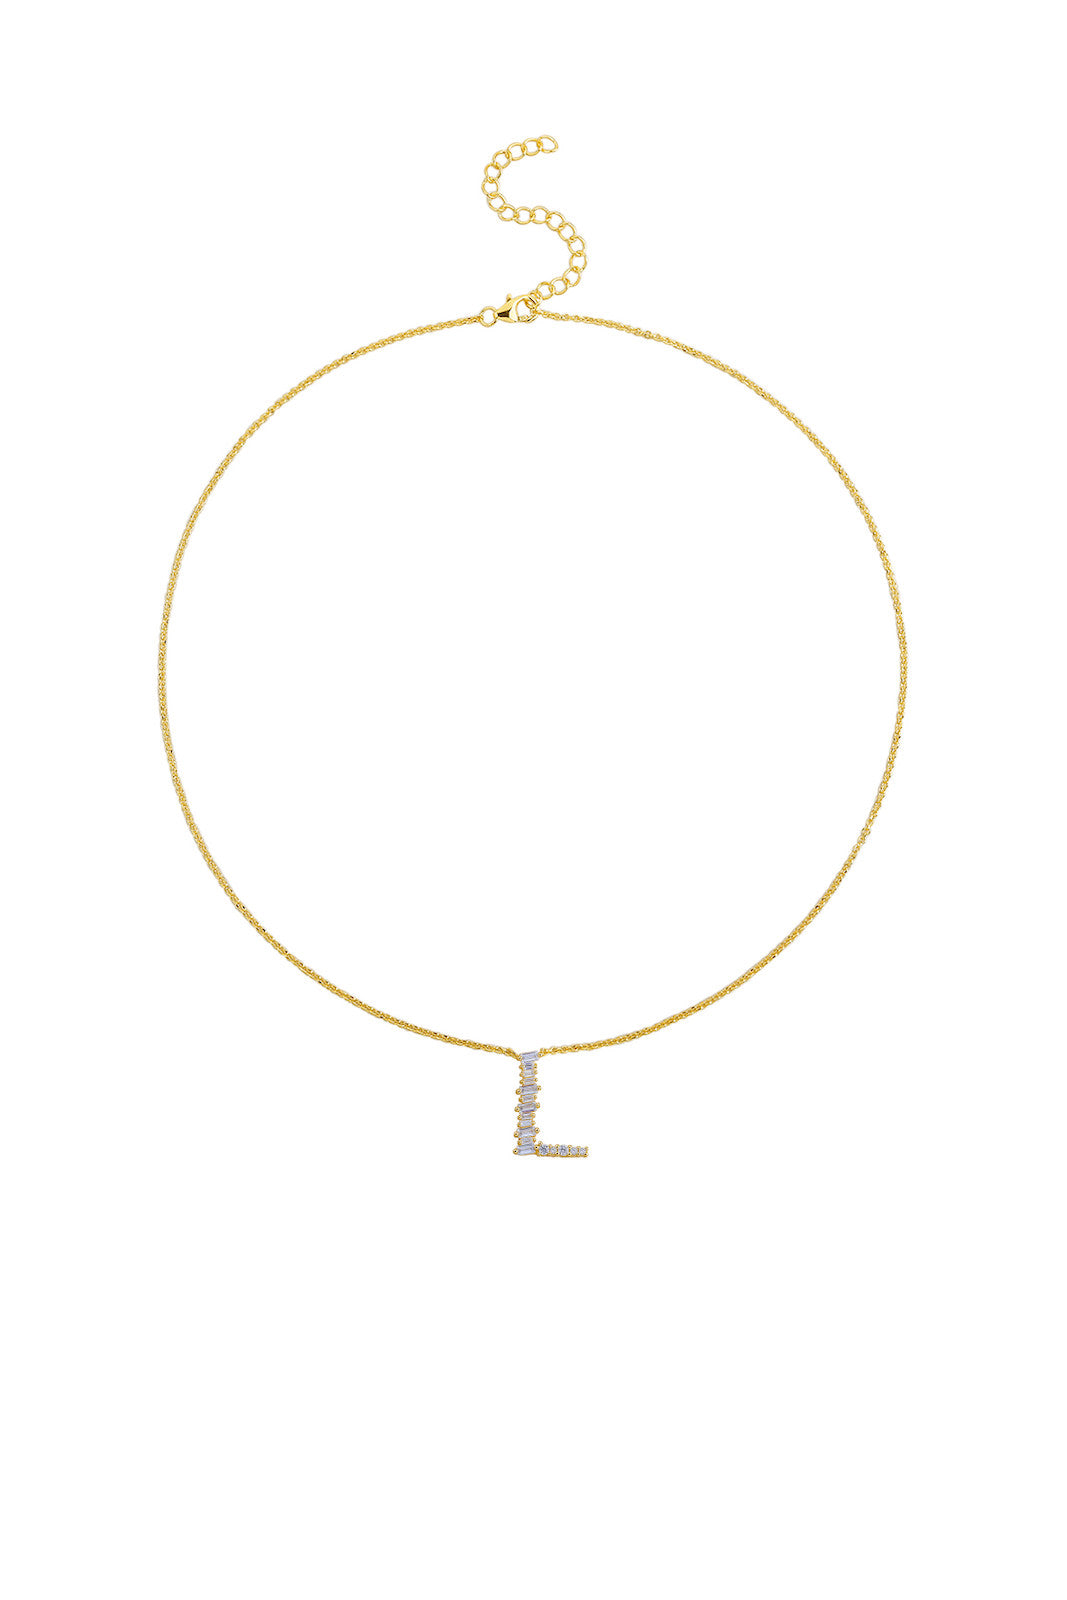 Gold Plated Sterling Silver Initial Necklace - Letter L Detail